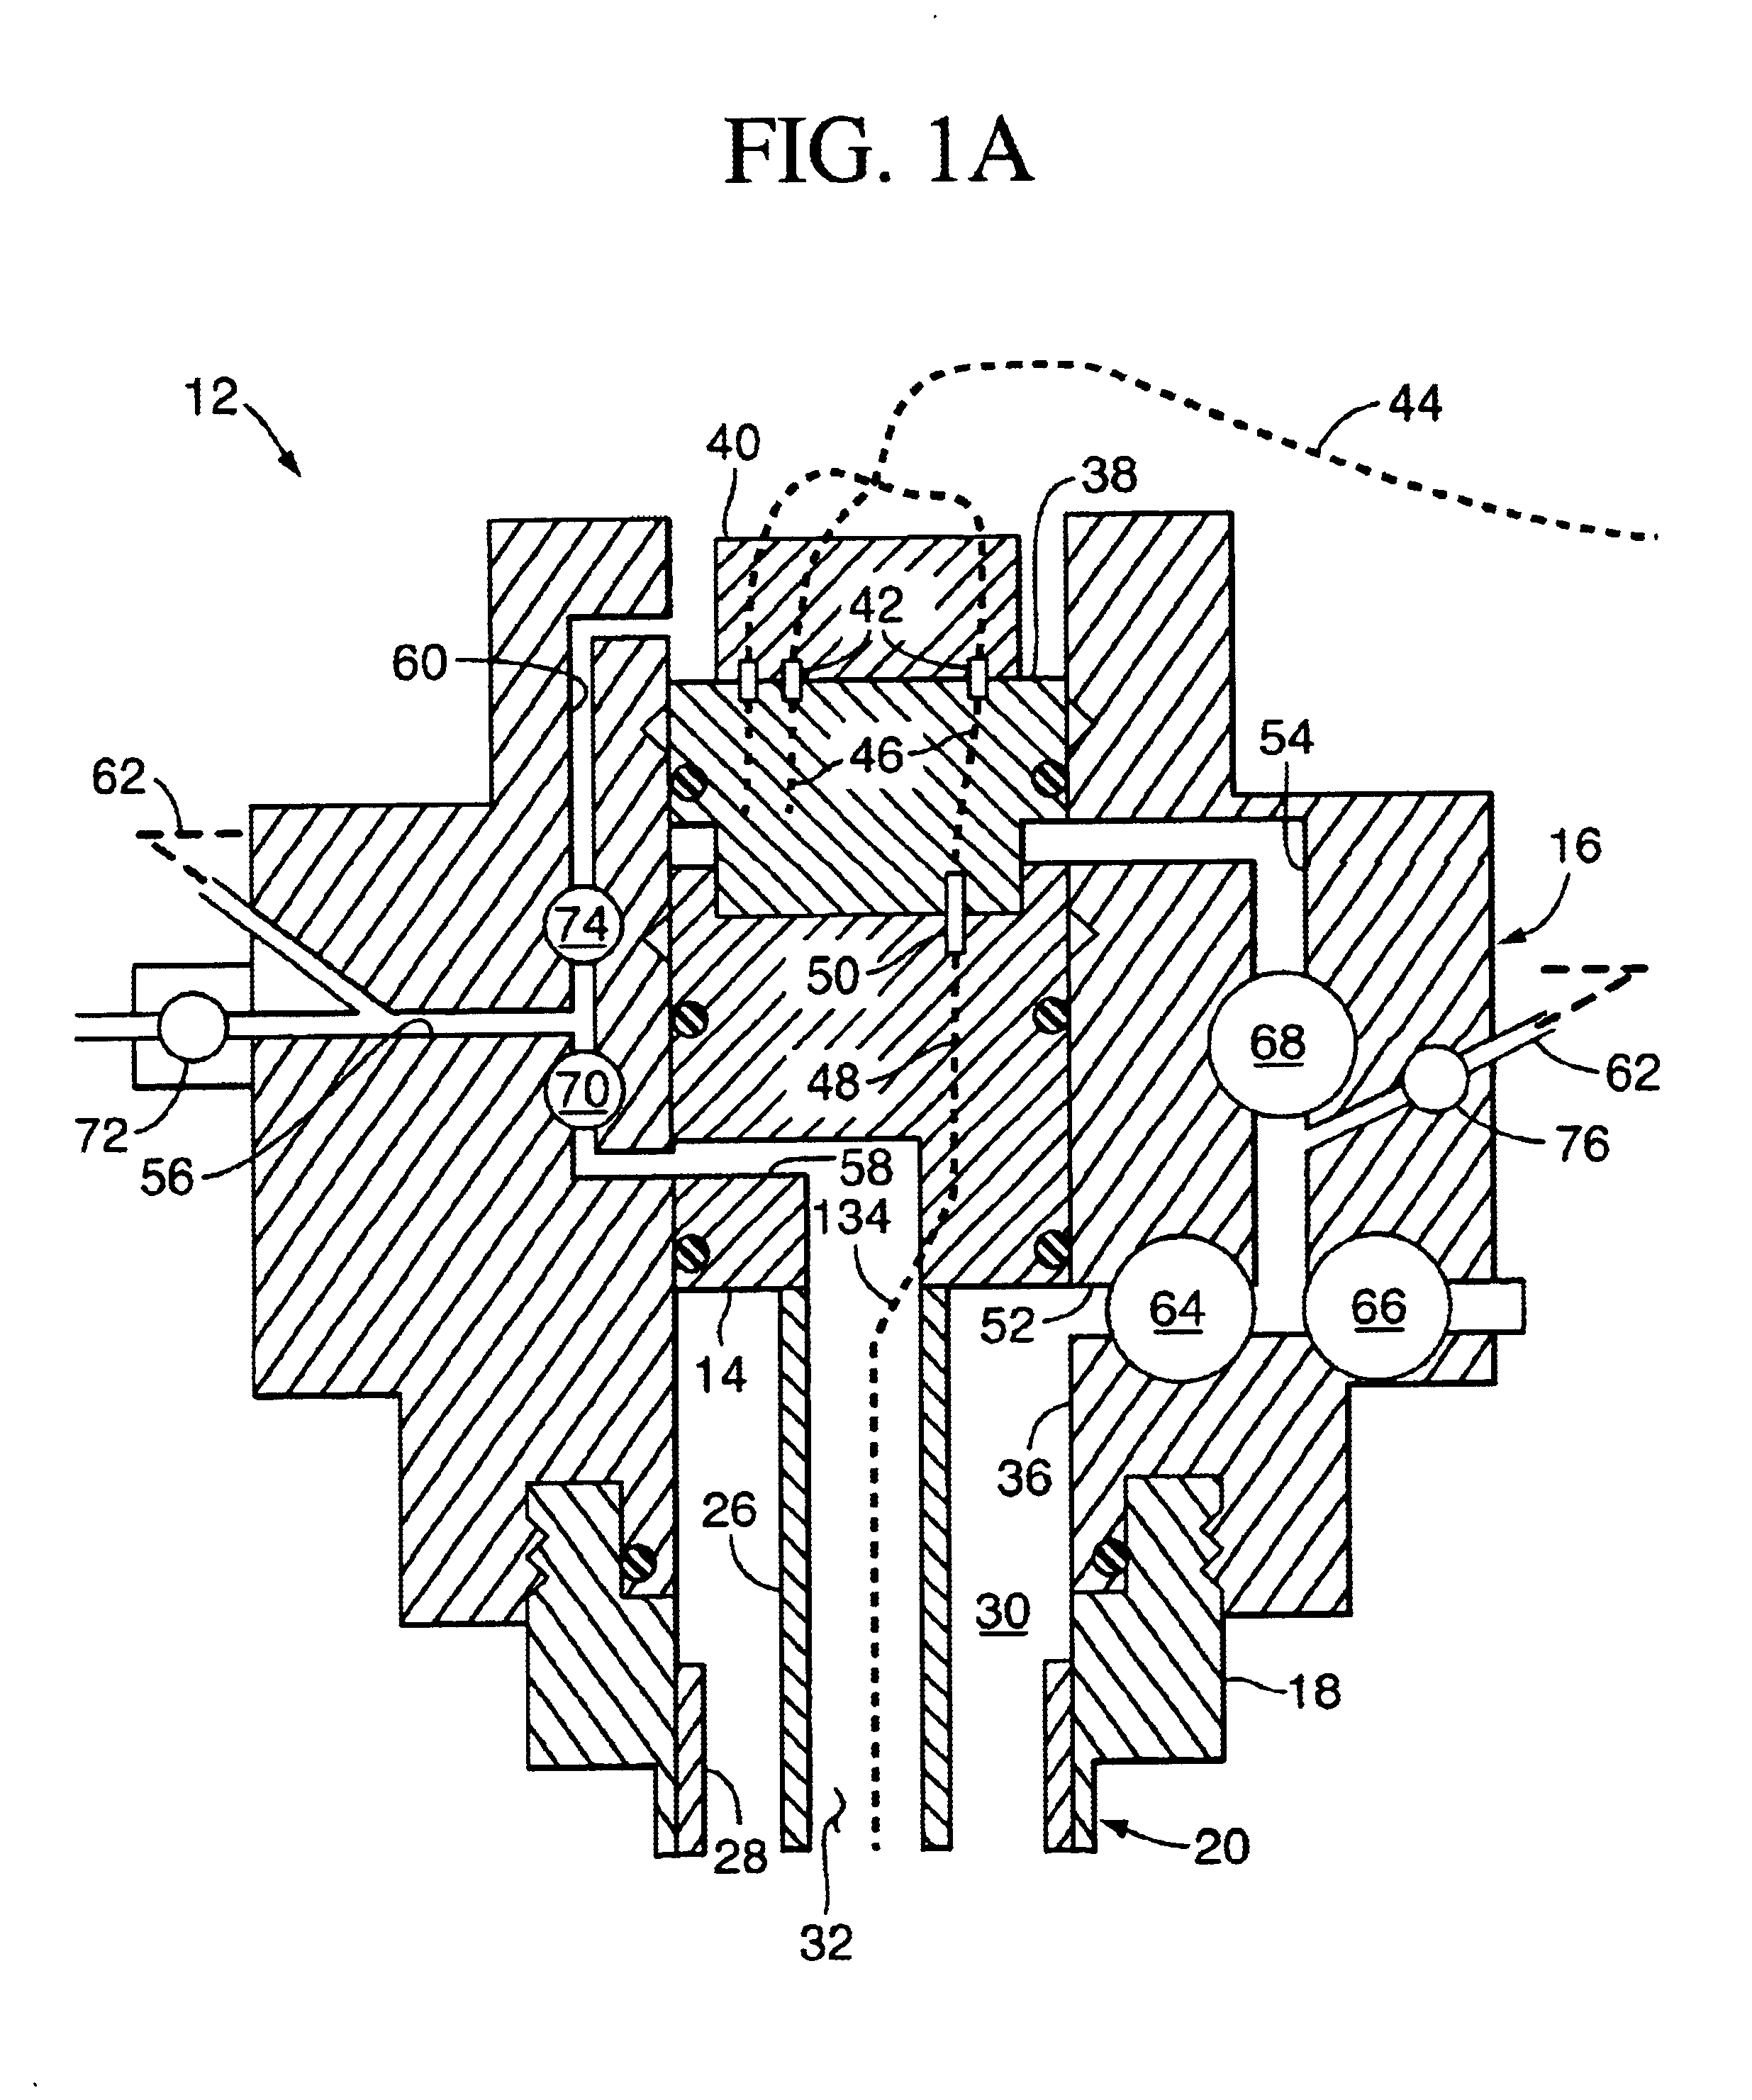 Downhole safety valve for central circulation completion system